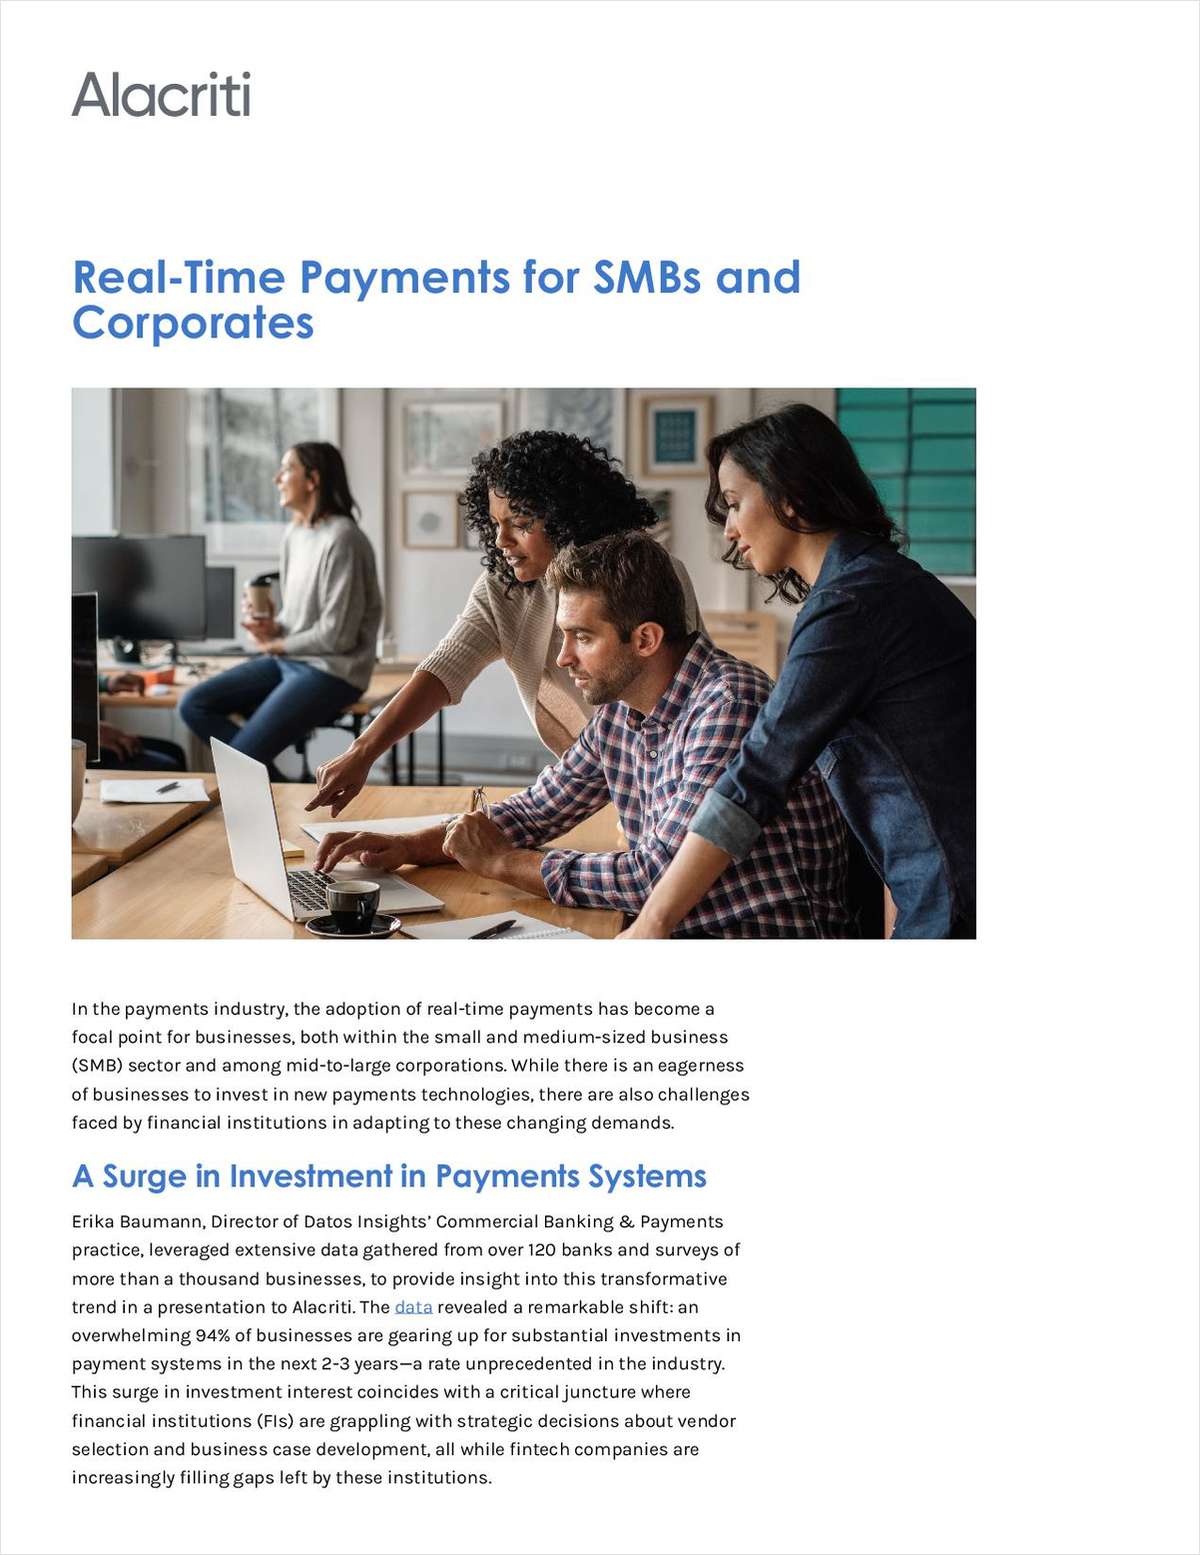 Unlocking Real-Time Payments for SMBs and Corporates link